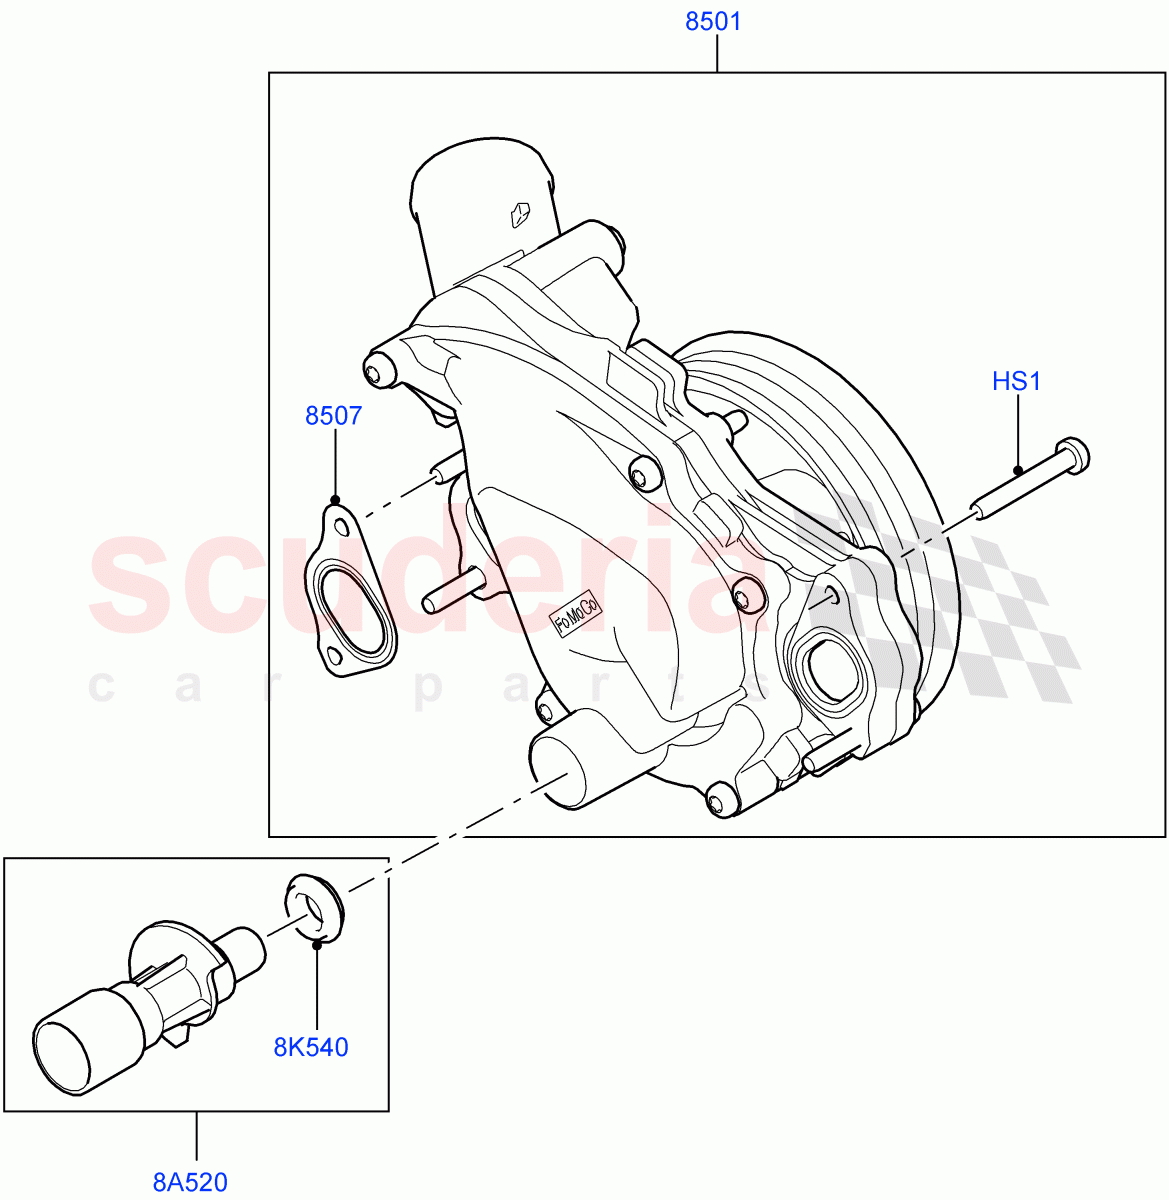 Water Pump(Main Unit, Solihull Plant Build)(3.0L DOHC GDI SC V6 PETROL)((V)FROMEA000001) of Land Rover Land Rover Range Rover Sport (2014+) [3.0 DOHC GDI SC V6 Petrol]